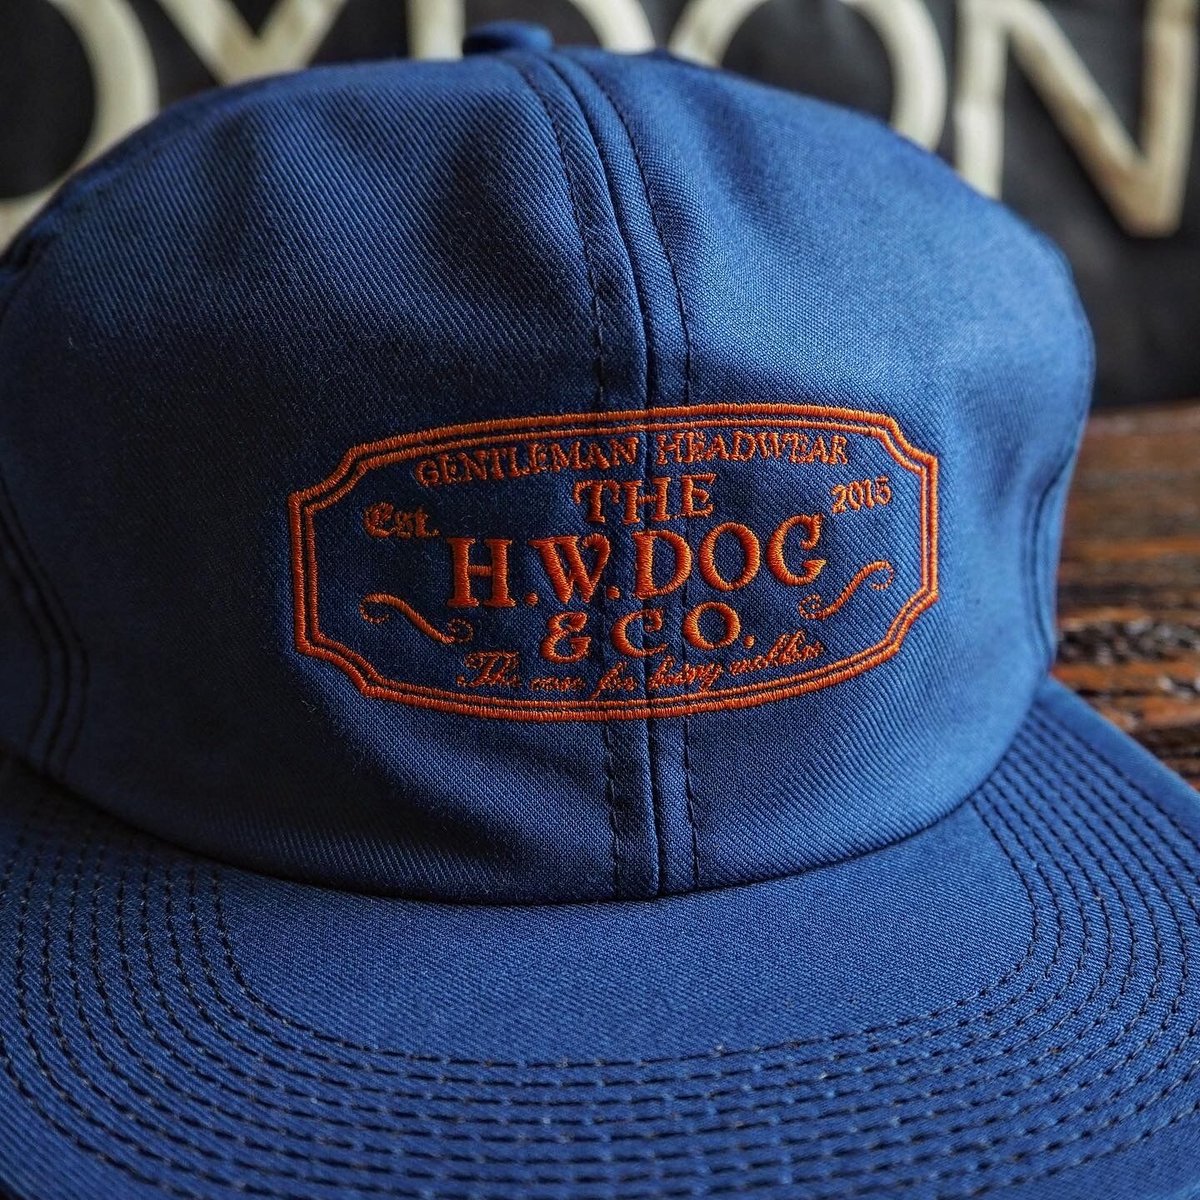 hwdog THE H.W.DOG&CO FRONT-H - 帽子